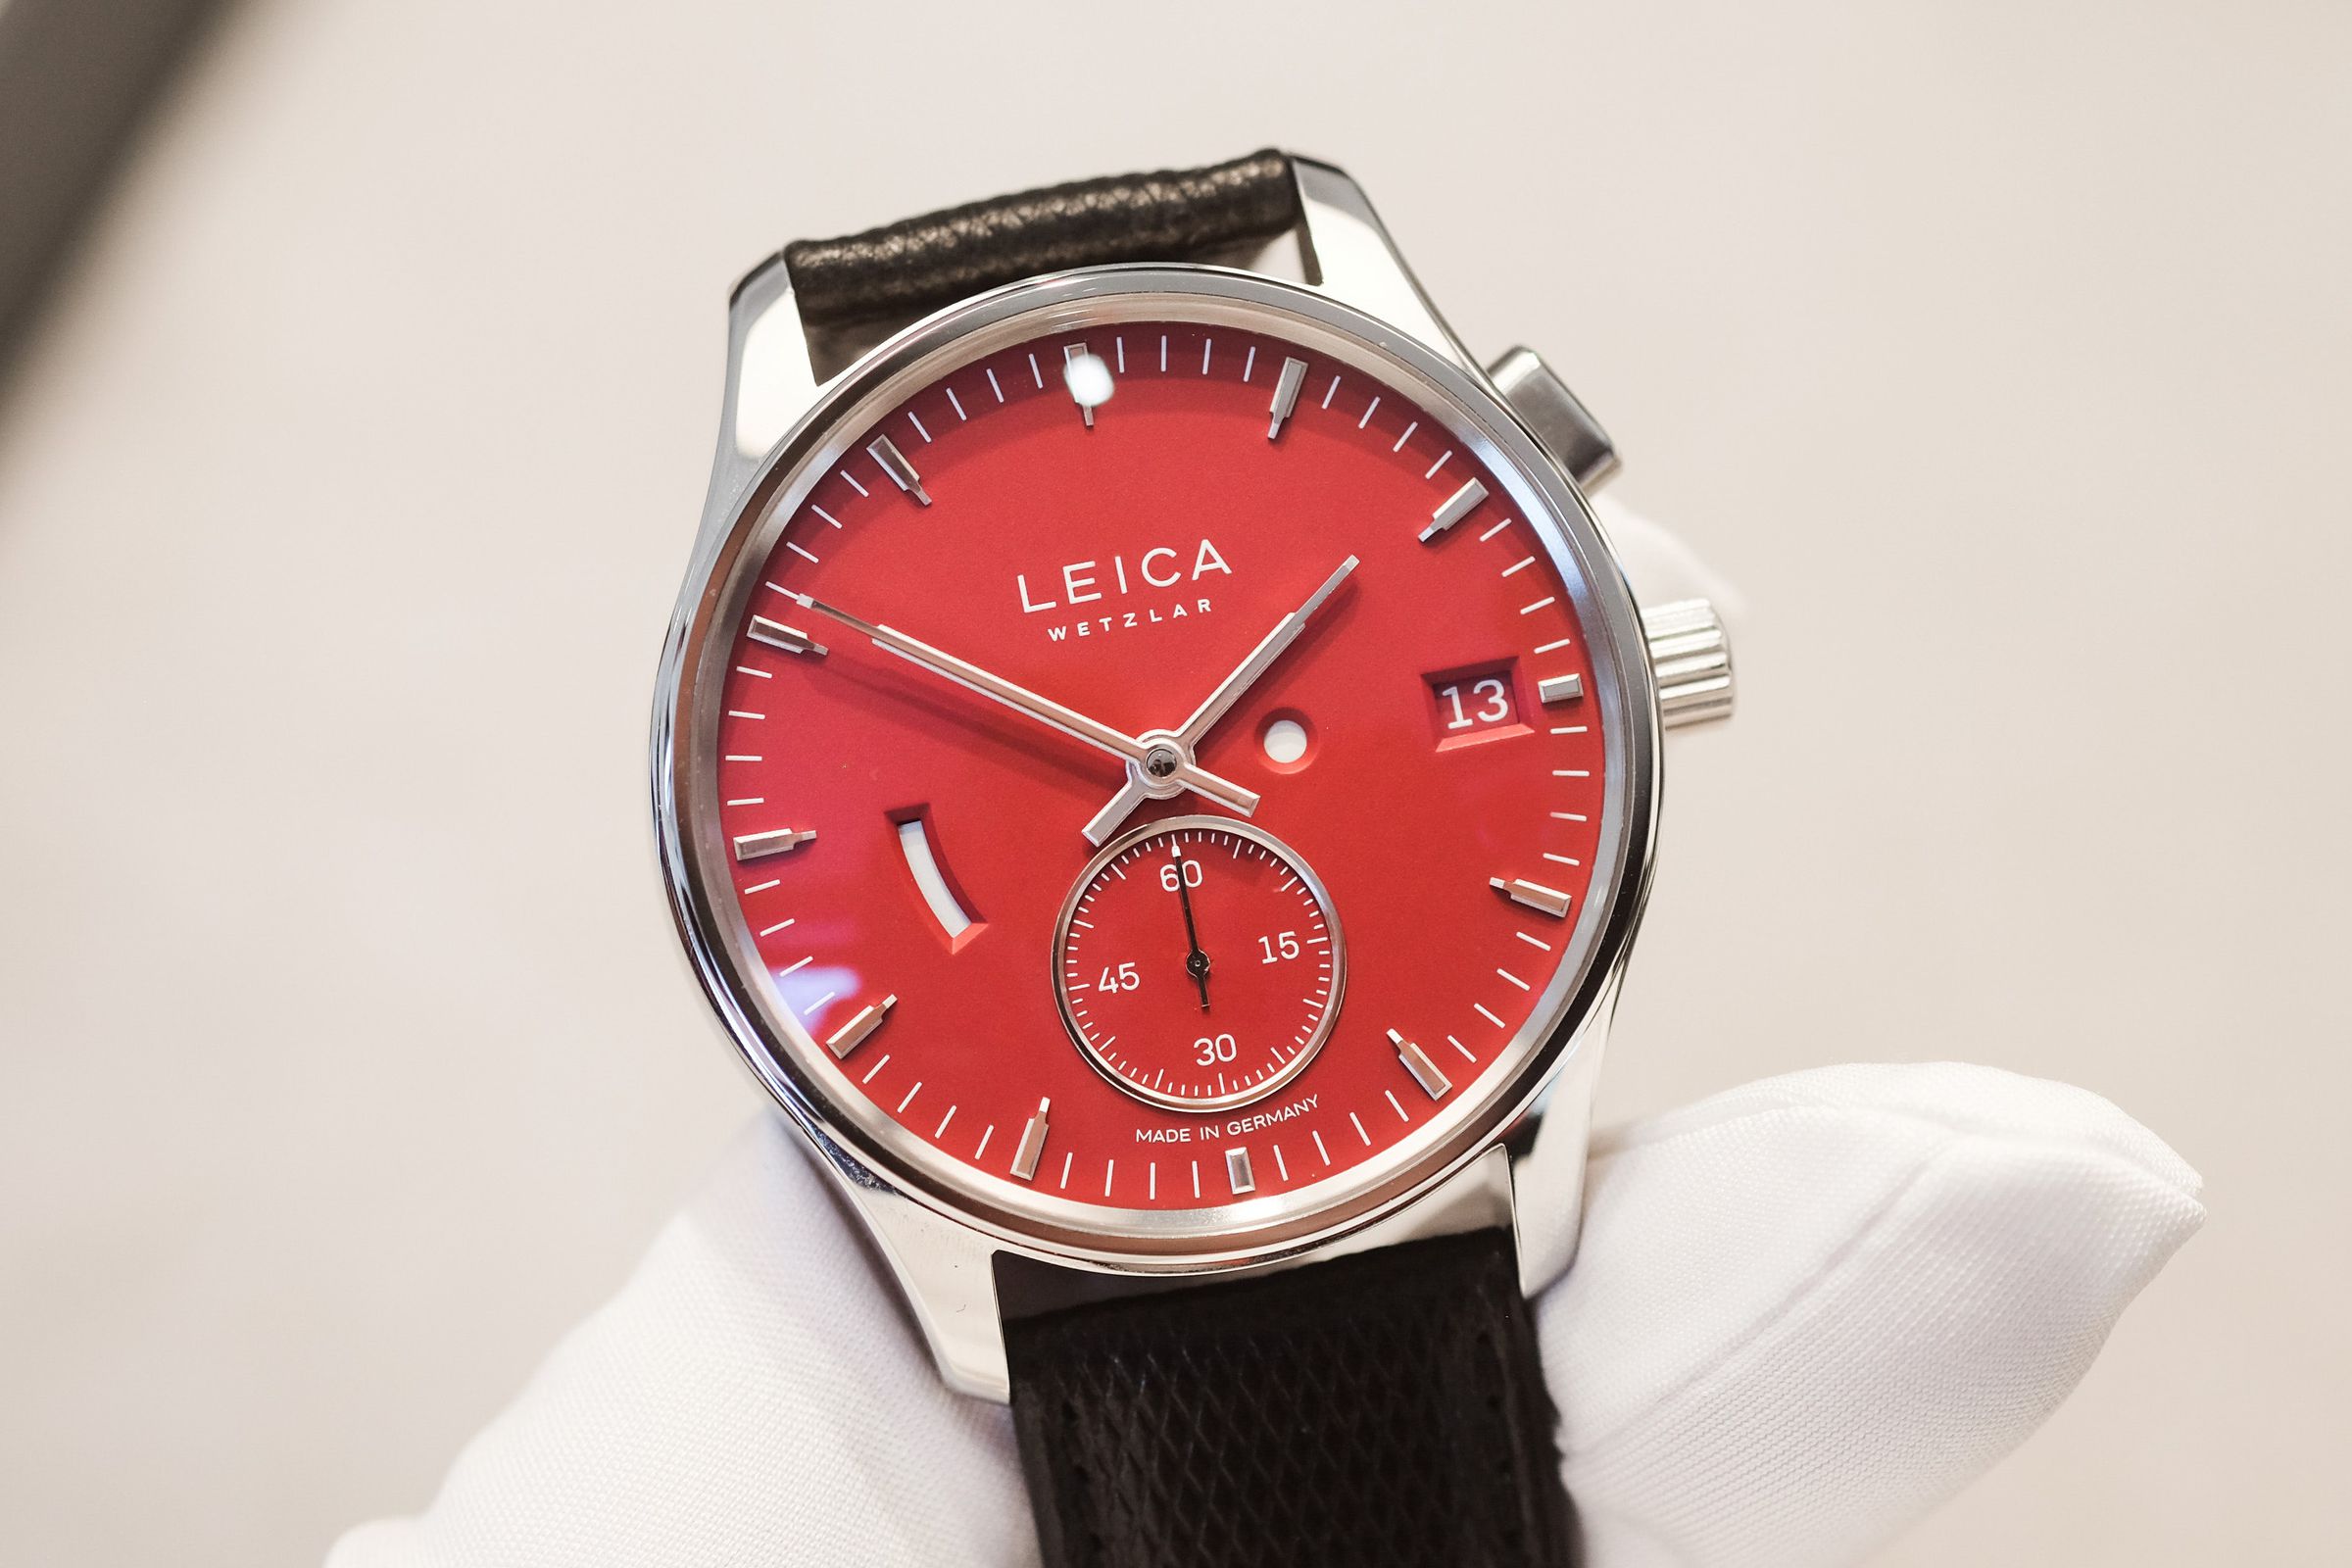 Limited edition Leica L1 with red dial